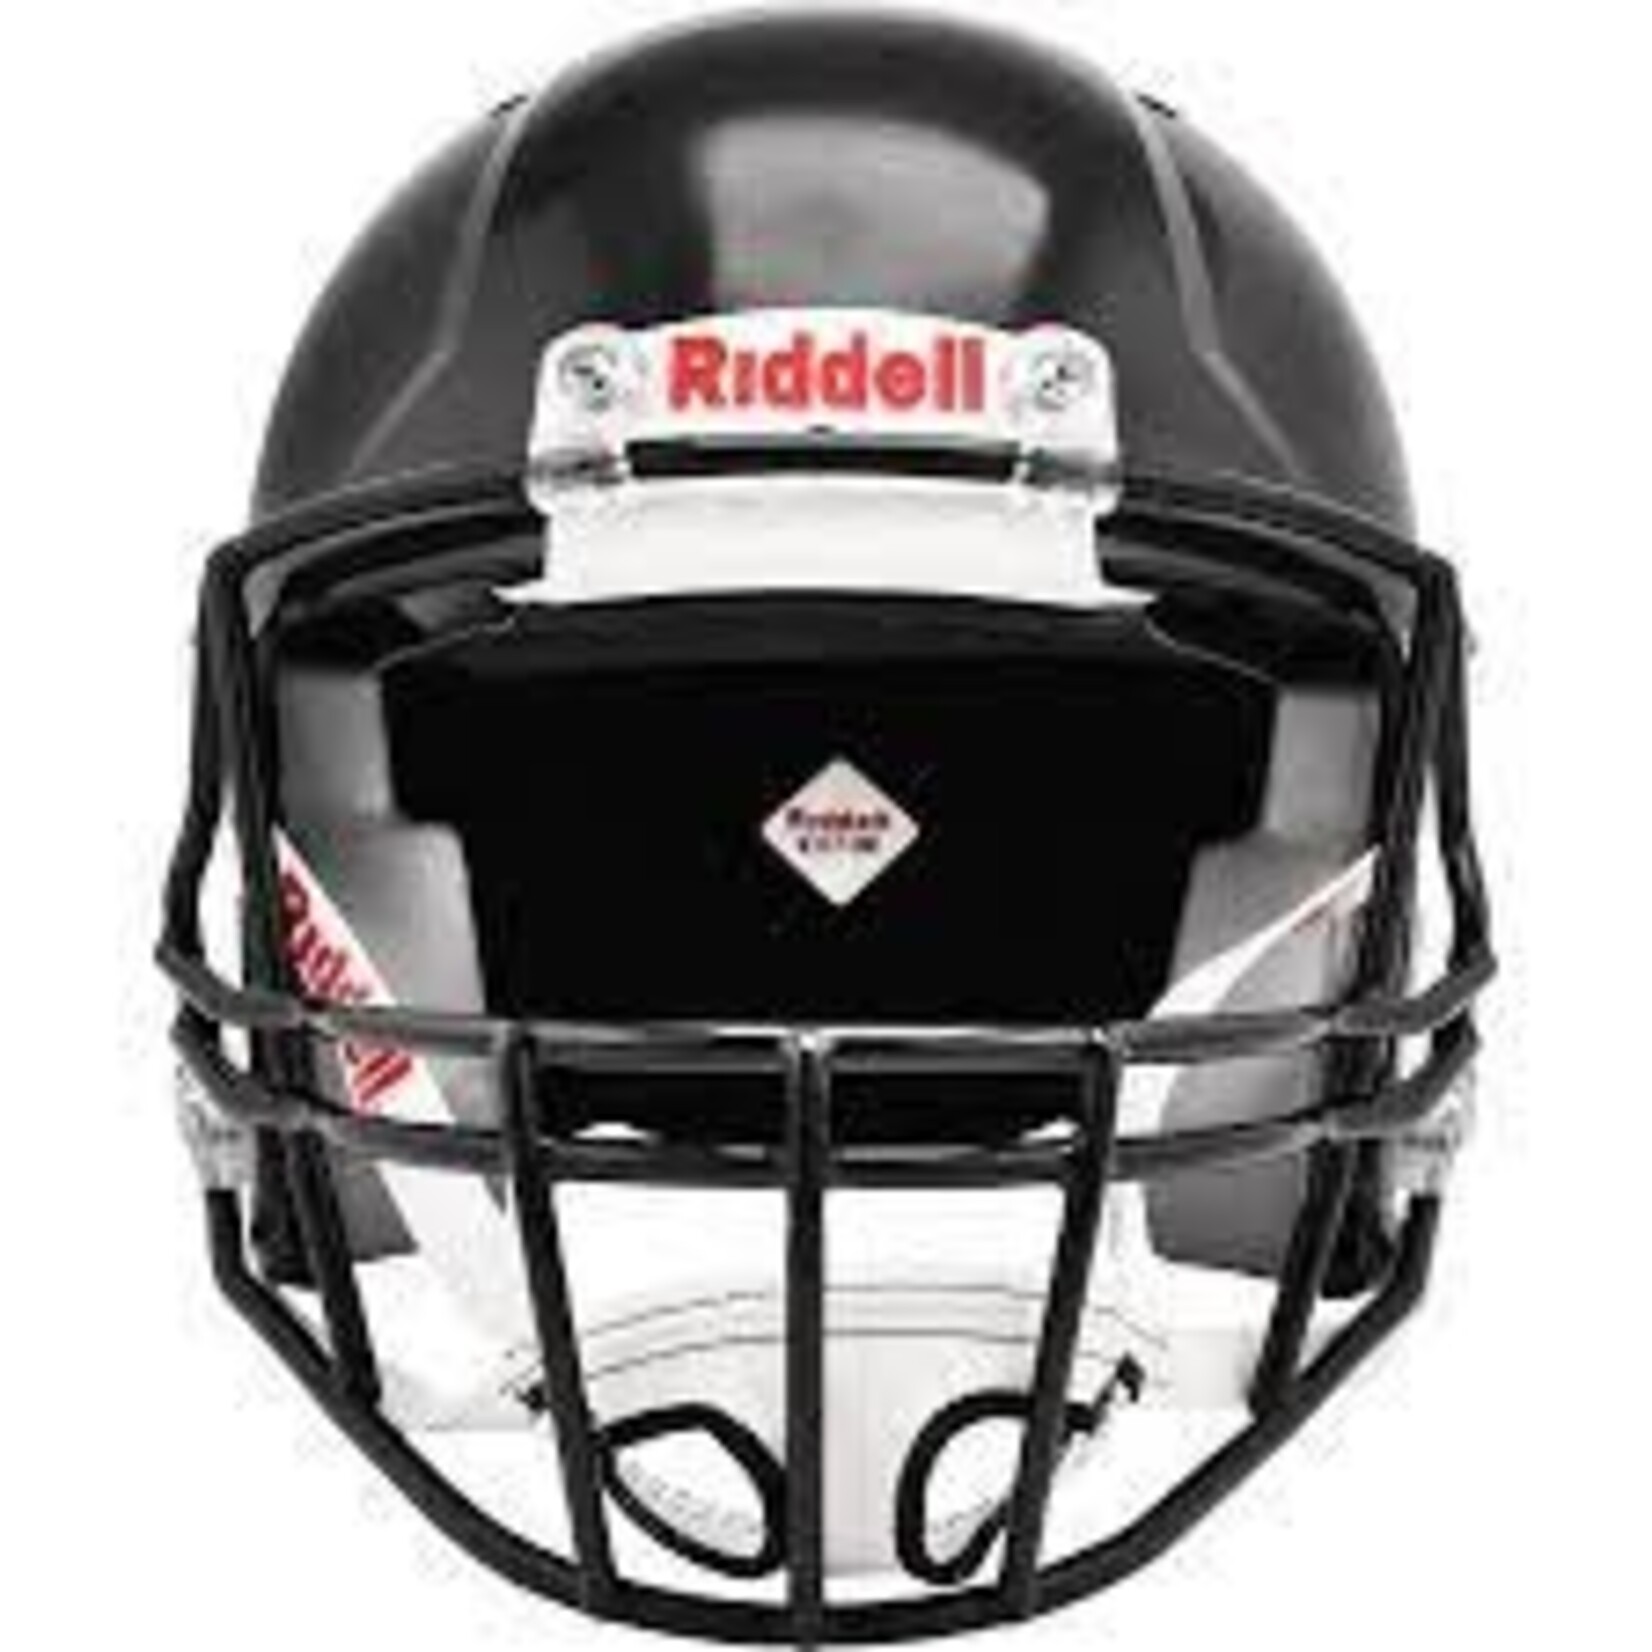 Riddell Victor-i Yth Helmet with Blk Mask & Soft Cup